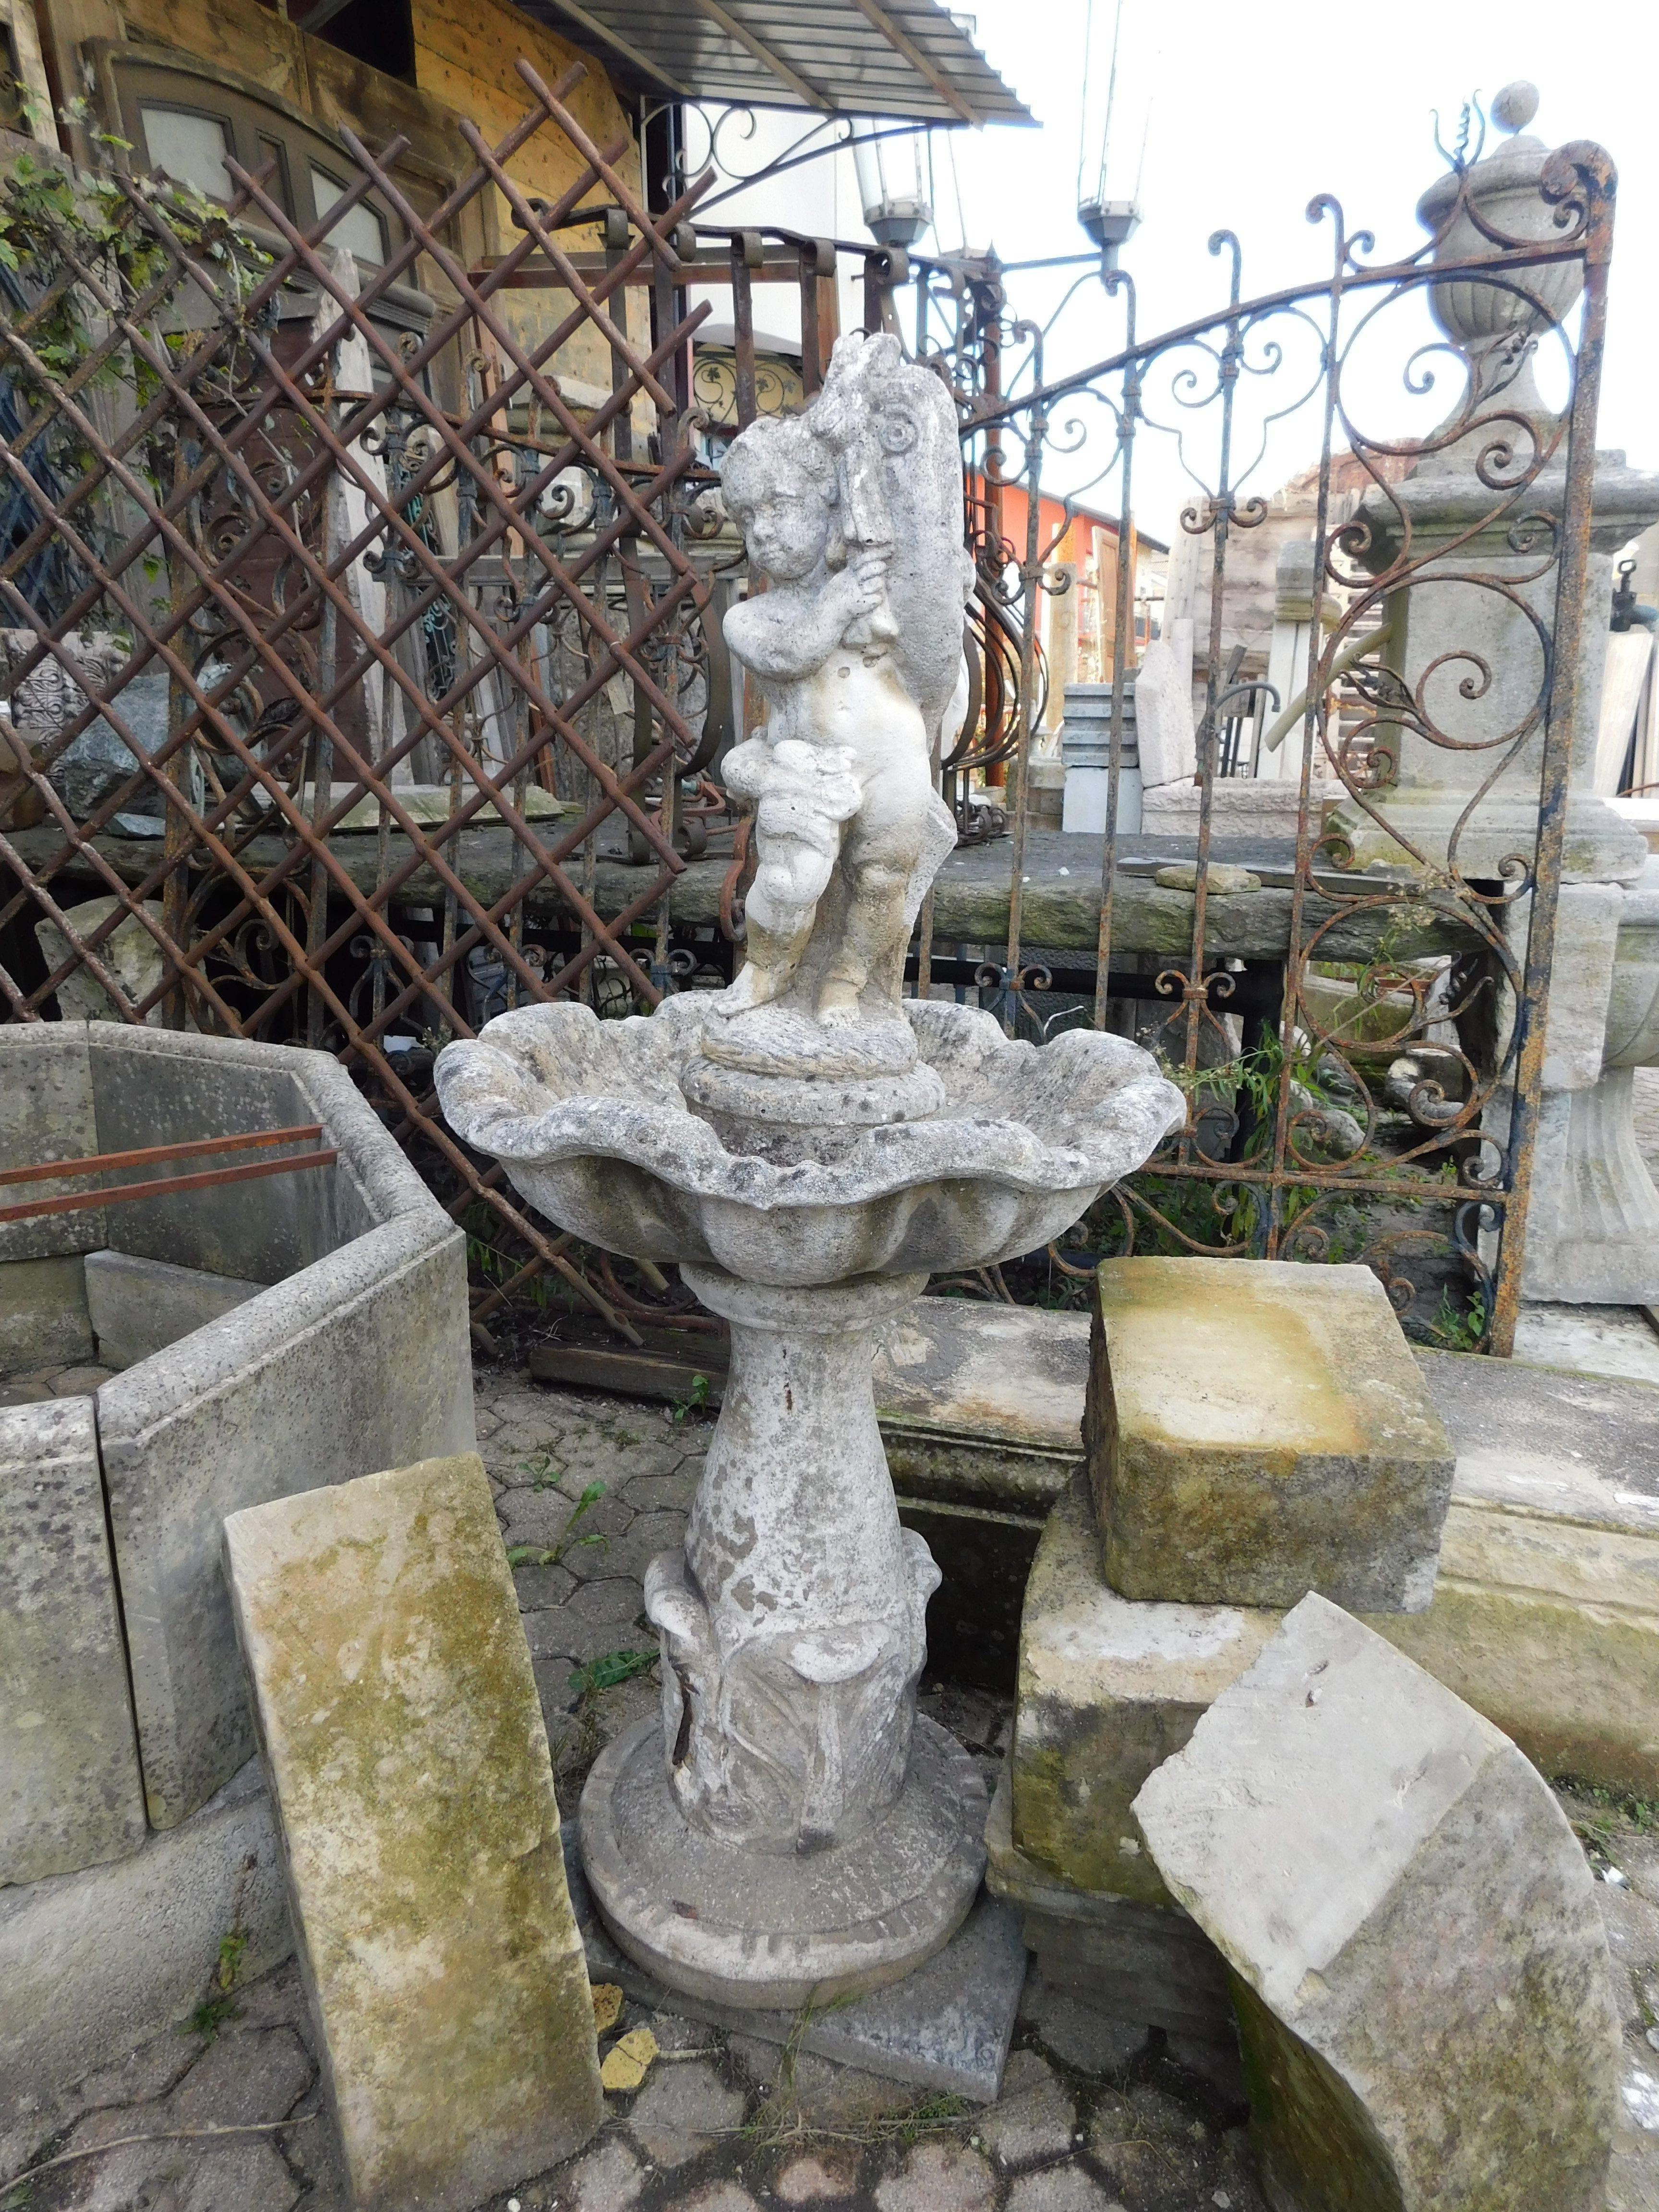 Vintage garden fountain, in artificial stone or concrete, carved with putto, basin and pedestal, built in the 1900s in Italy
tub circumference measures 60 cm x H 135, base 40 cm